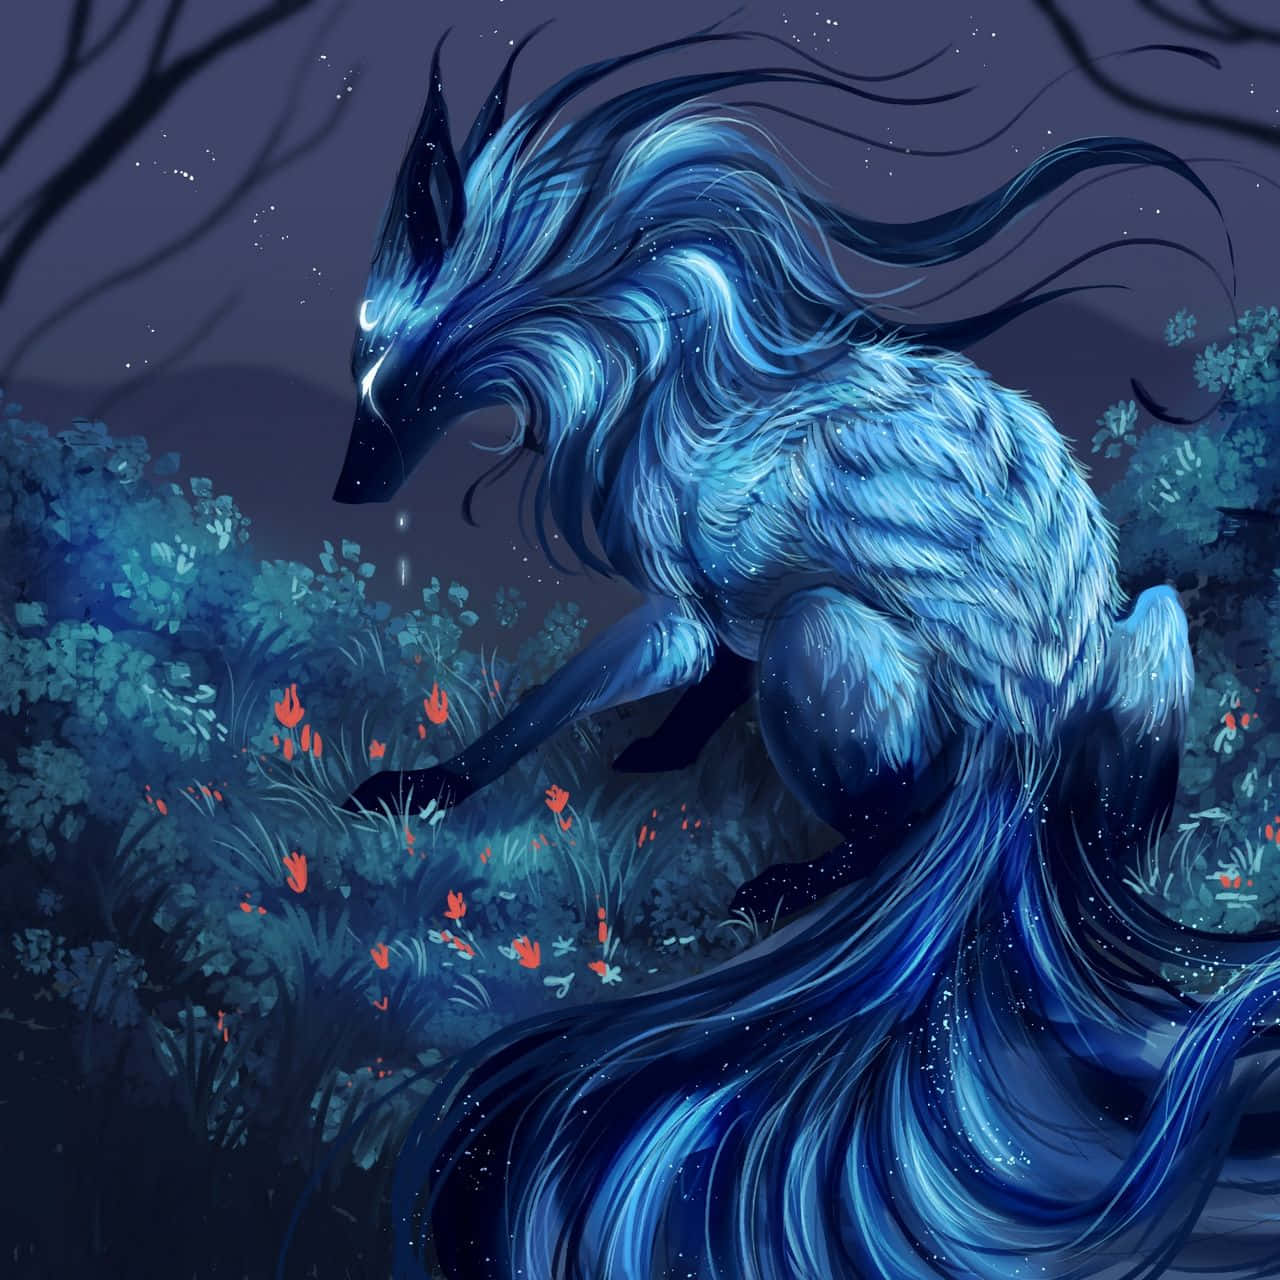 A Blue Fox With Long Hair In The Forest Wallpaper